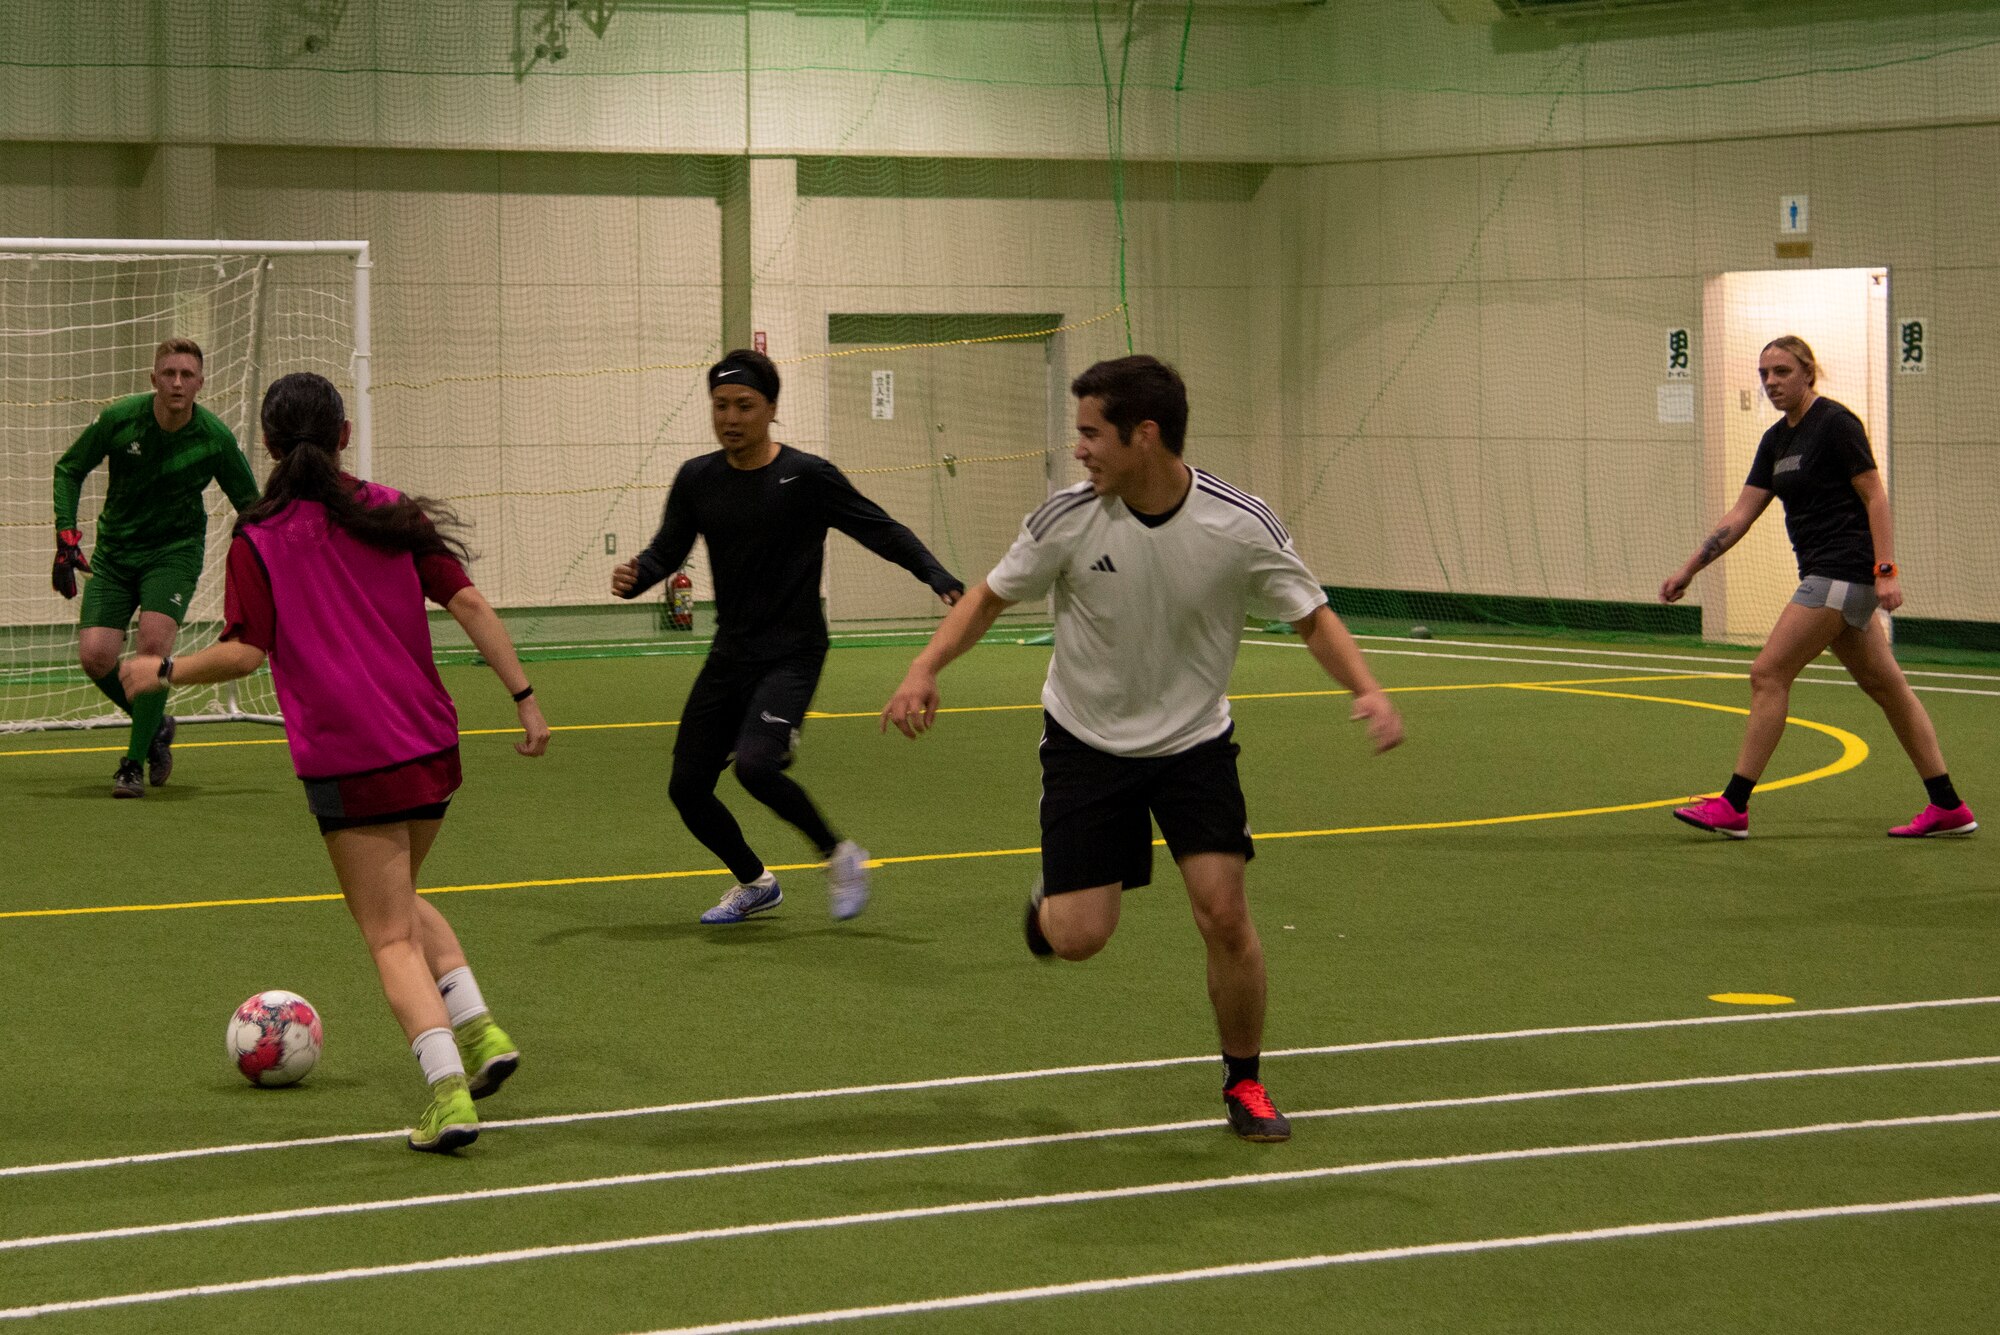 A group of players play soccer at an indoor soccer field.